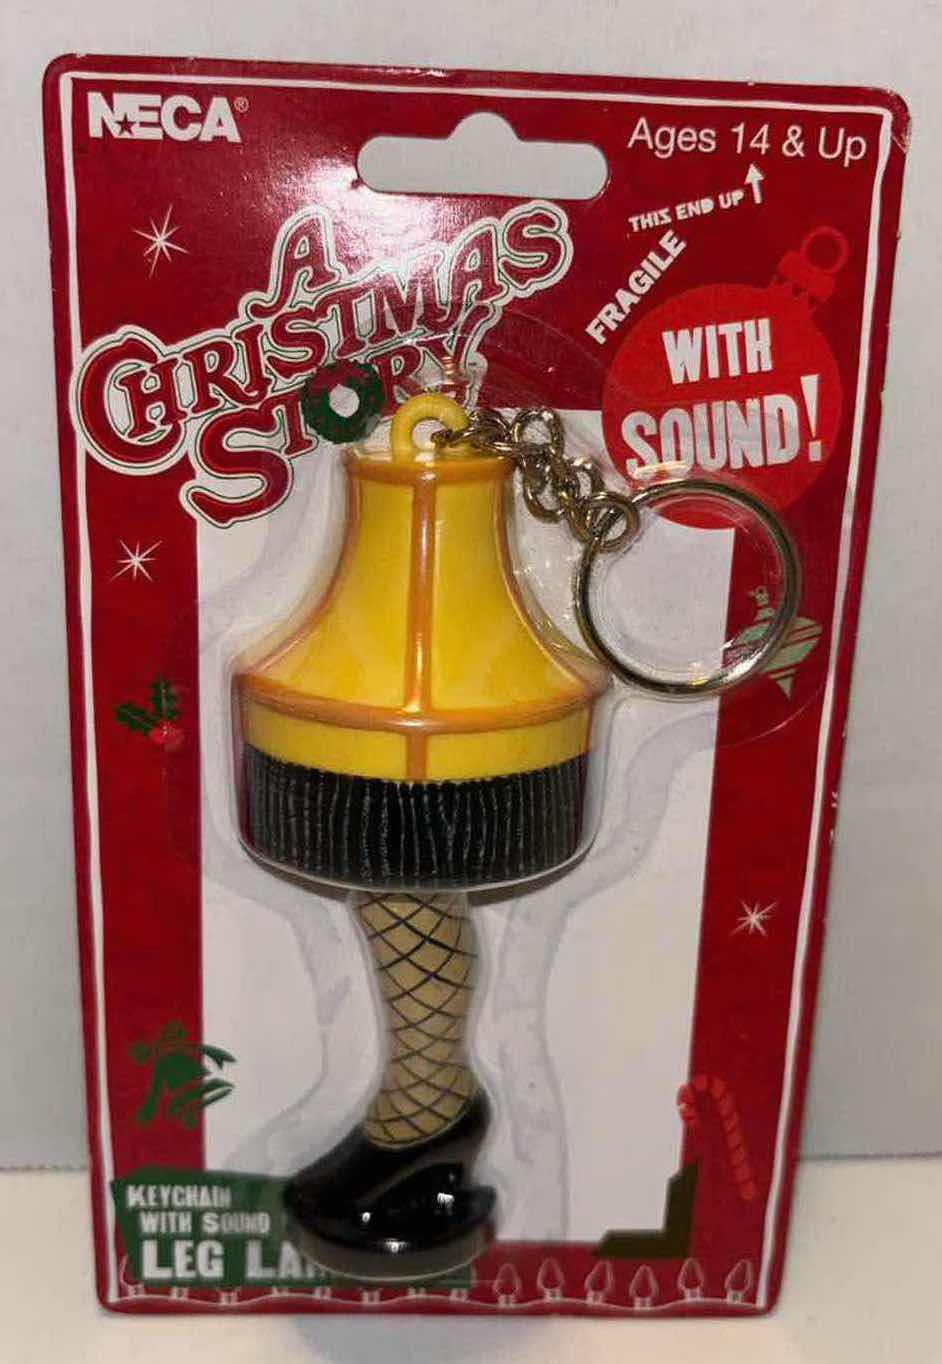 Photo 5 of NEW FUNKO GAMES A CHRISTMAS STORY “A MAJOR CARD GAME” & NECA A CHRISTMAS STORY LEG LAMP TALKING KEYCHAIN (2)